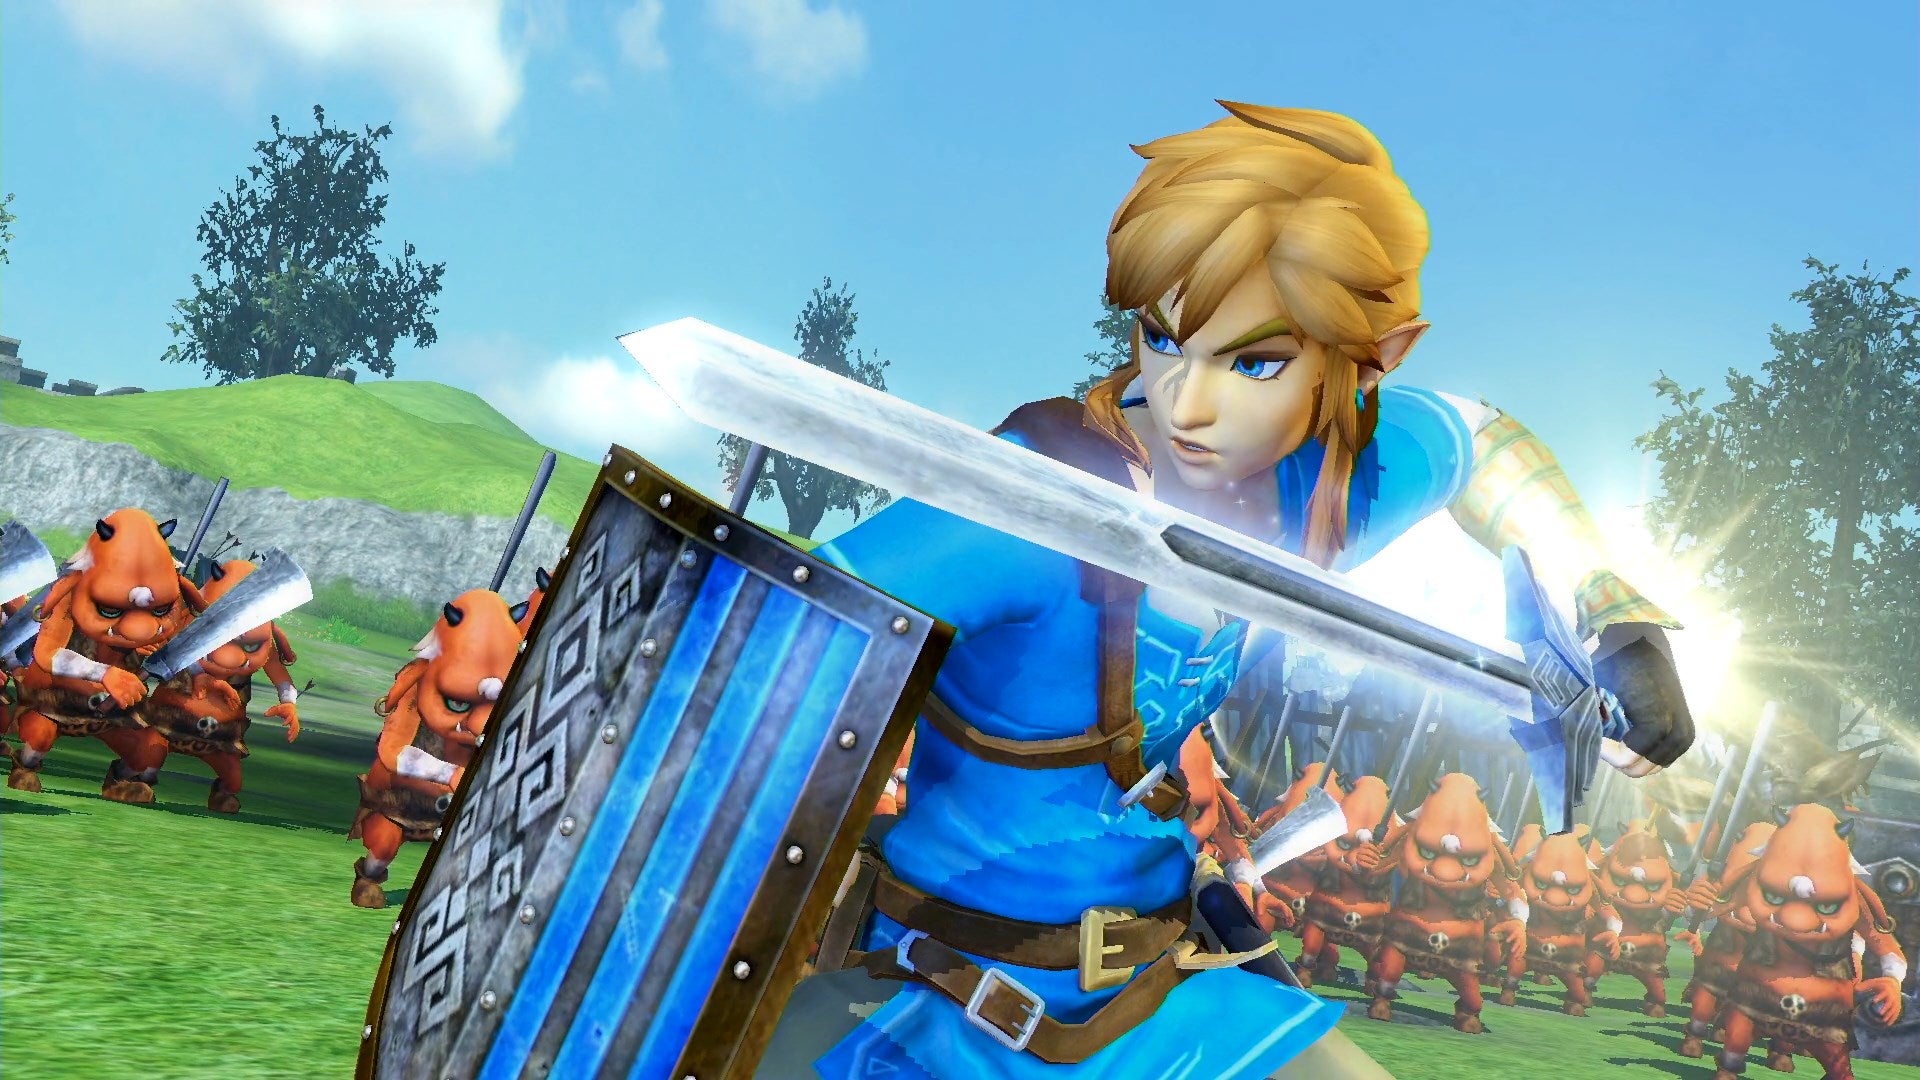 Image for Hyrule Warriors: Definitive Edition coming to Switch this spring with all previously available content